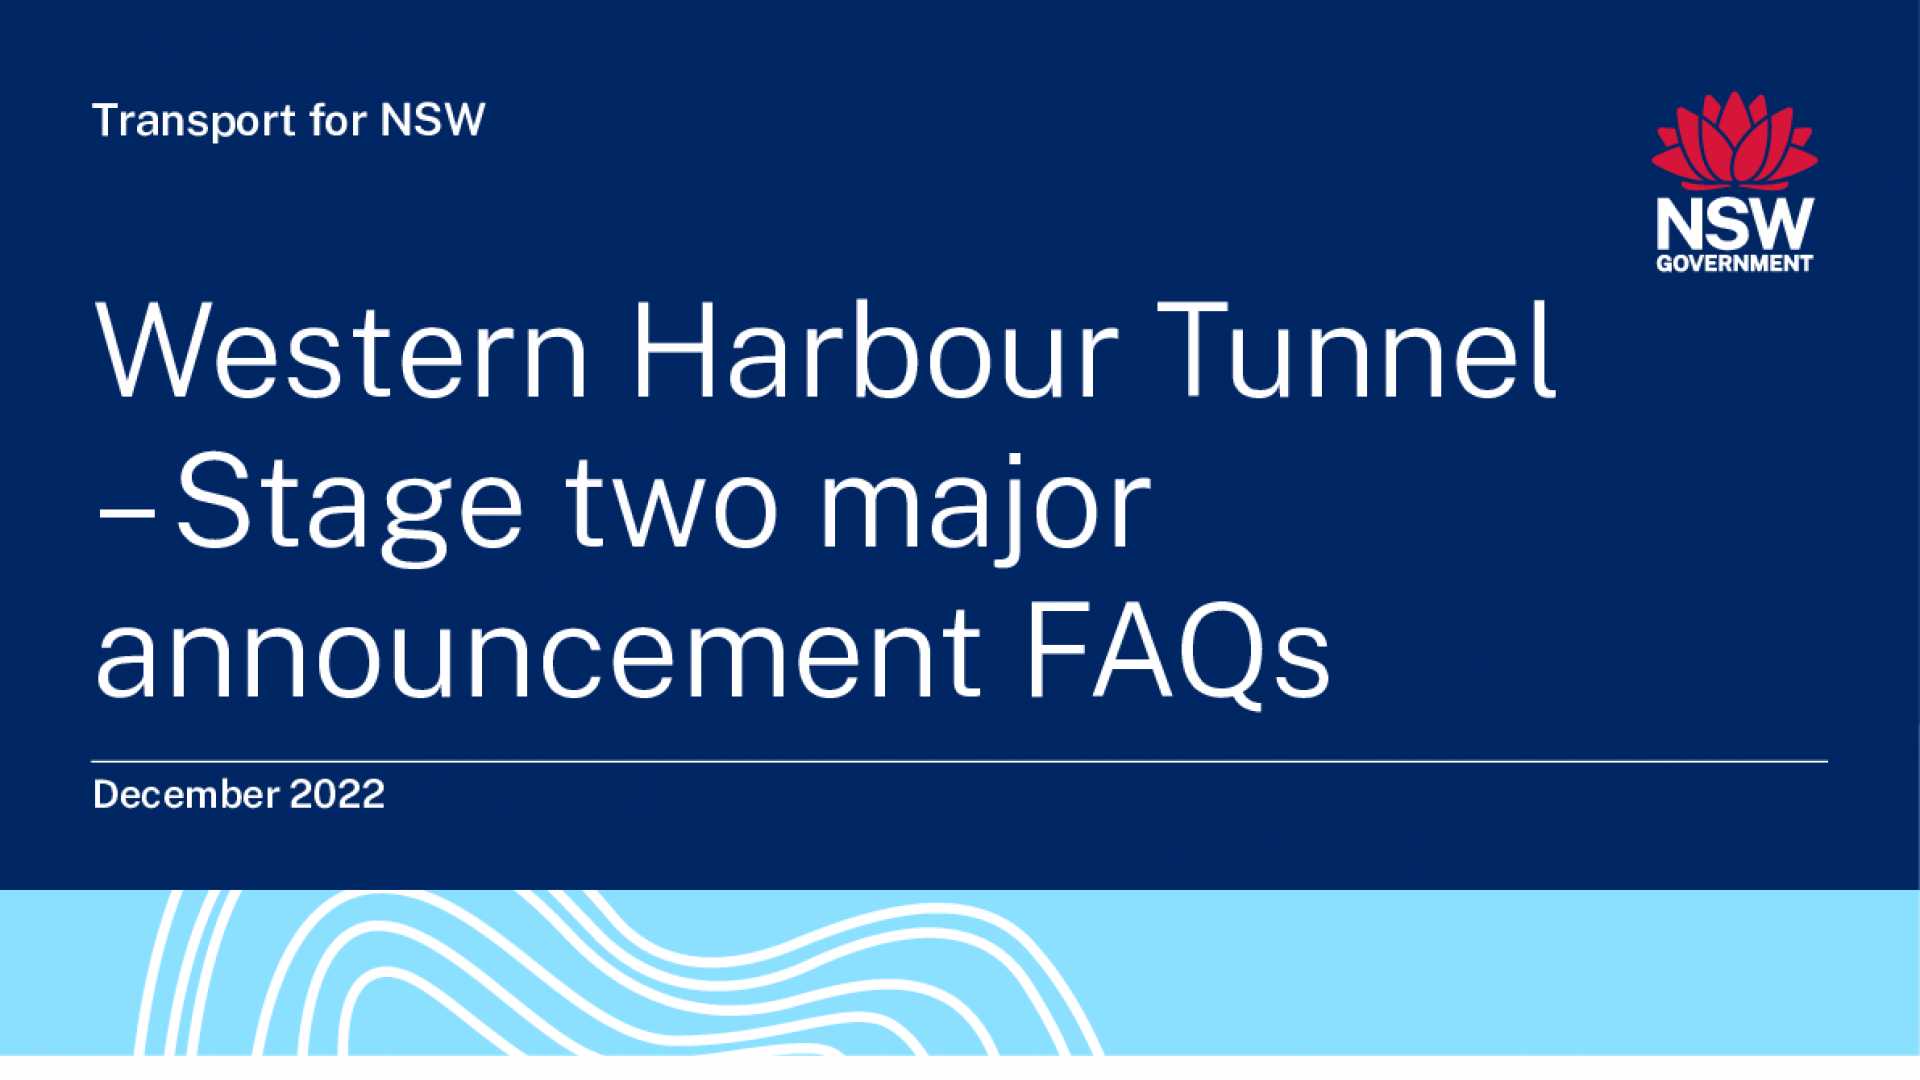 Stage 2 tunnelling FAQs